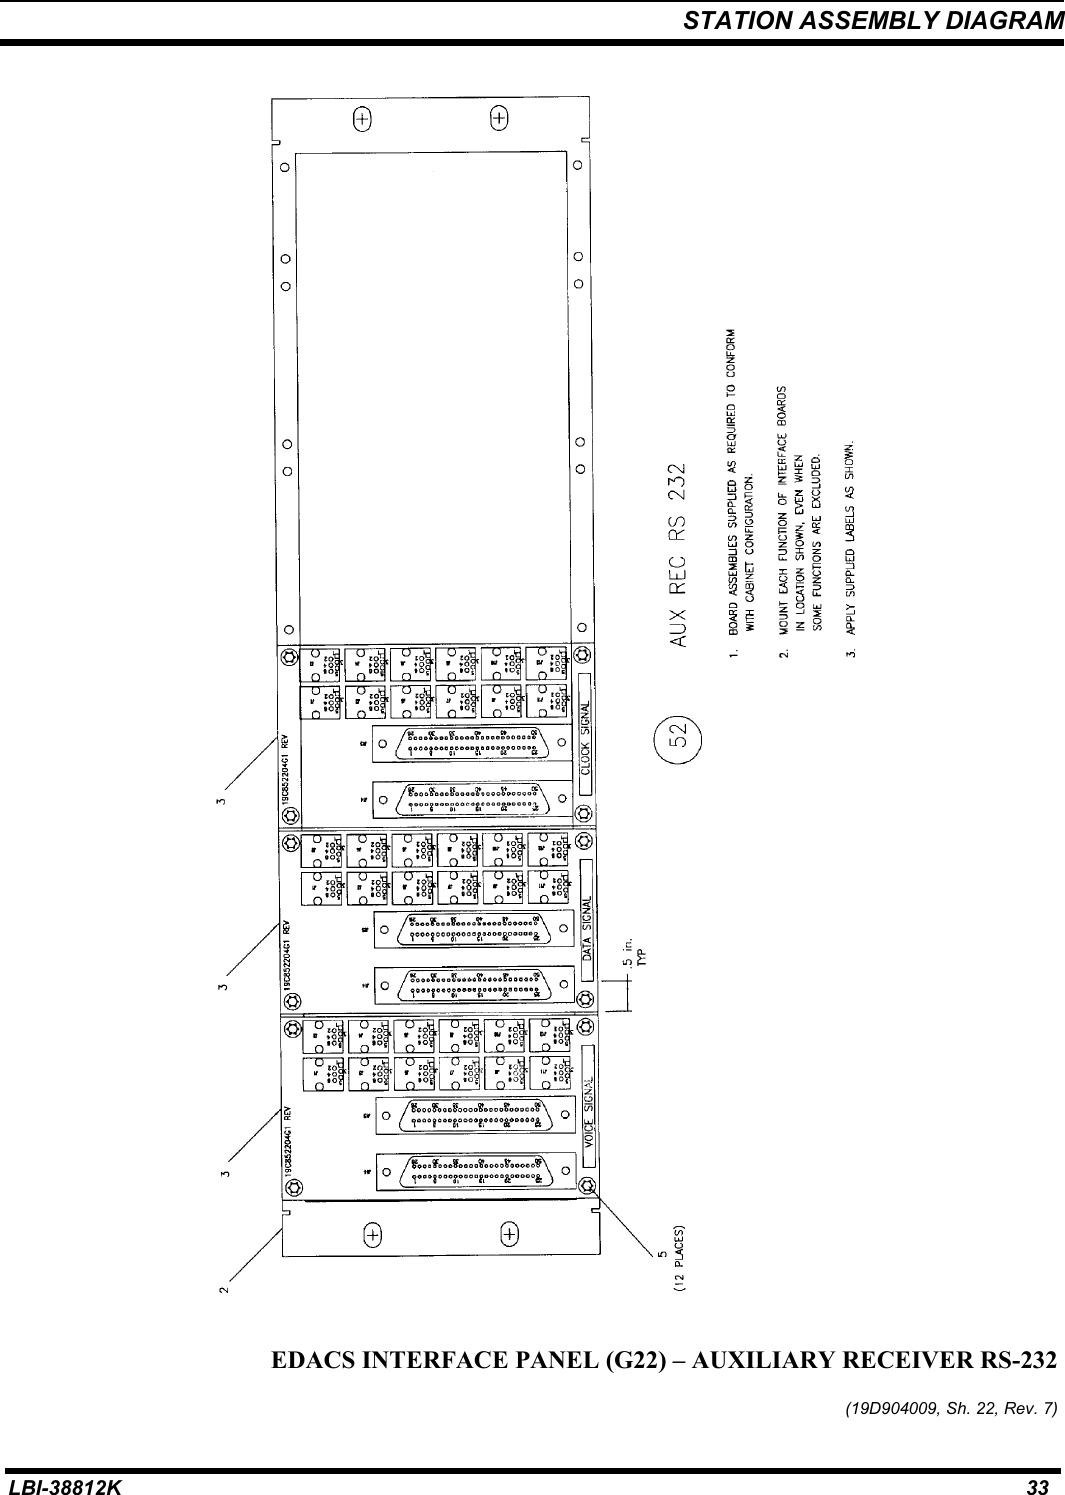 STATION ASSEMBLY DIAGRAMLBI-38812K 33EDACS INTERFACE PANEL (G22) – AUXILIARY RECEIVER RS-232(19D904009, Sh. 22, Rev. 7)